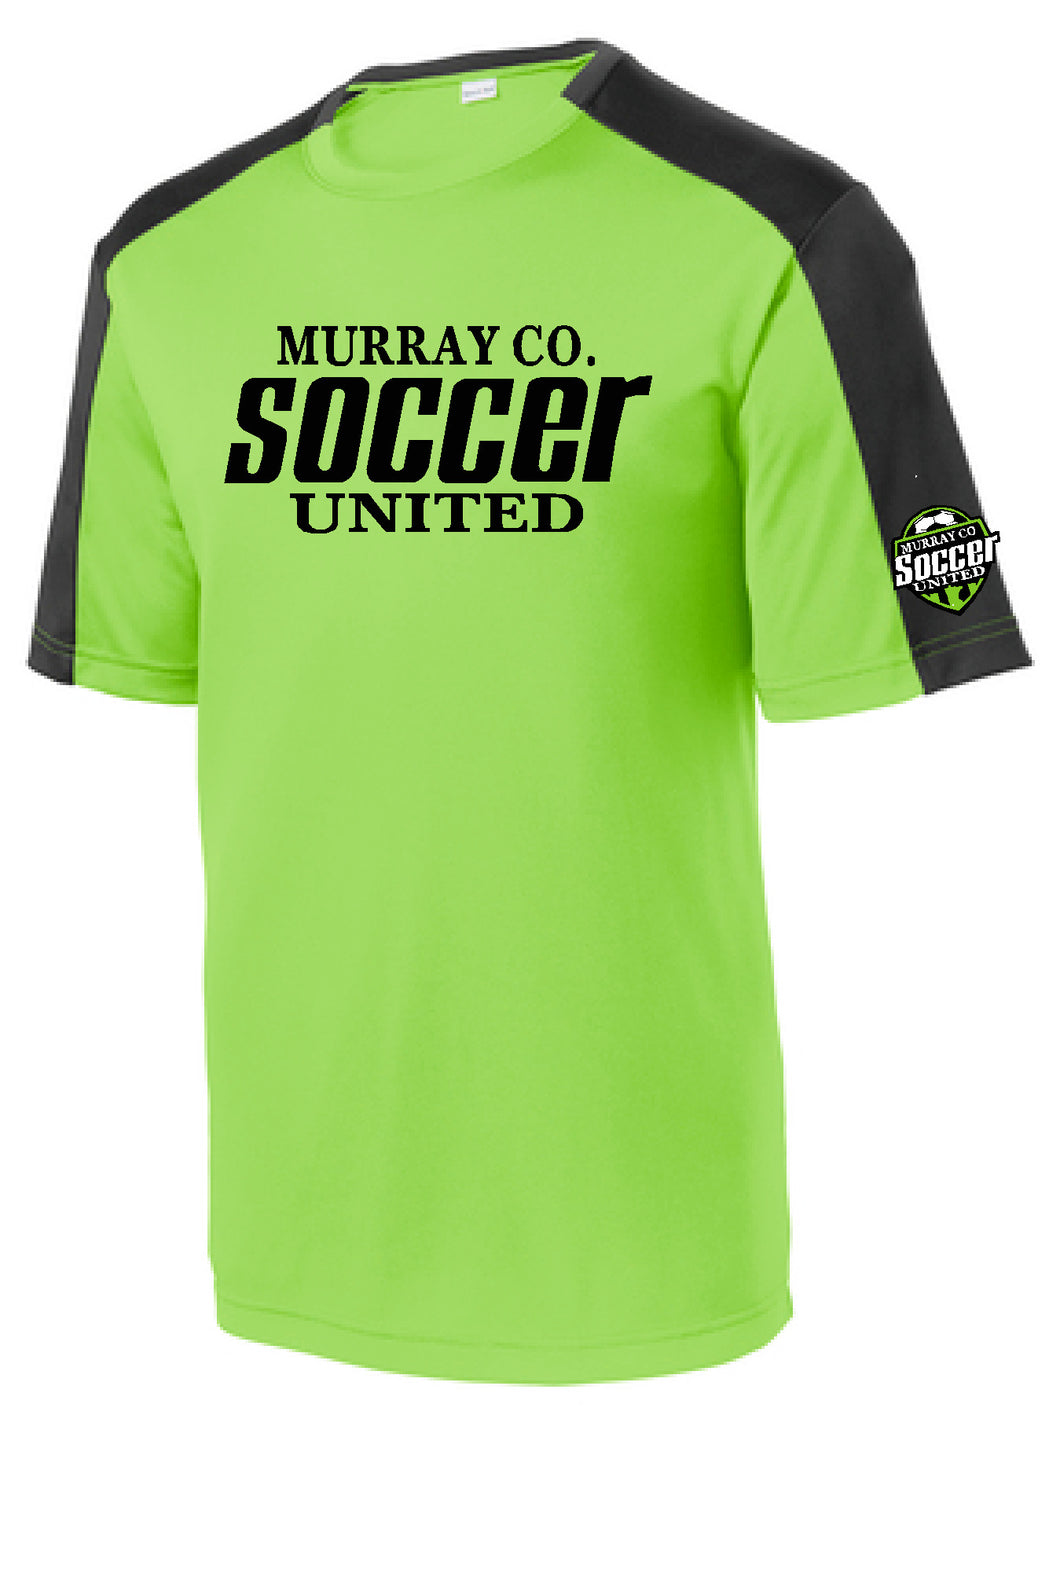 MURRAY COUNTY SOCCER UNITED LIME COMPETITOR TEE SLEEVE LOGO